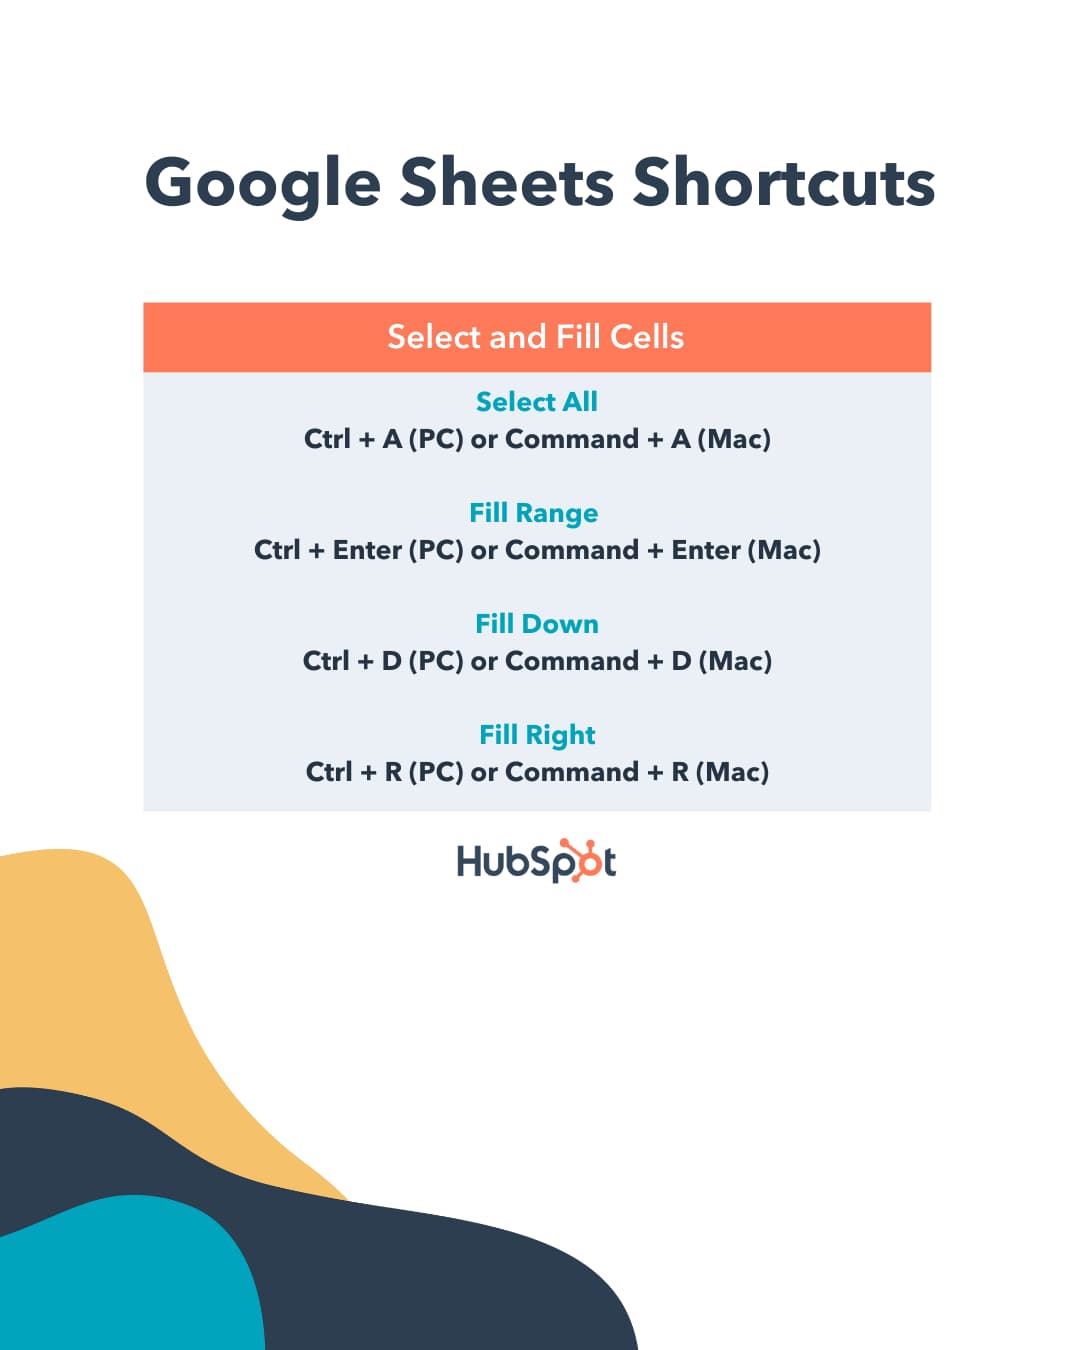 How to use Google Spreadsheets shortcuts to select everything, fill in the range, fill down, and fill in the right. 